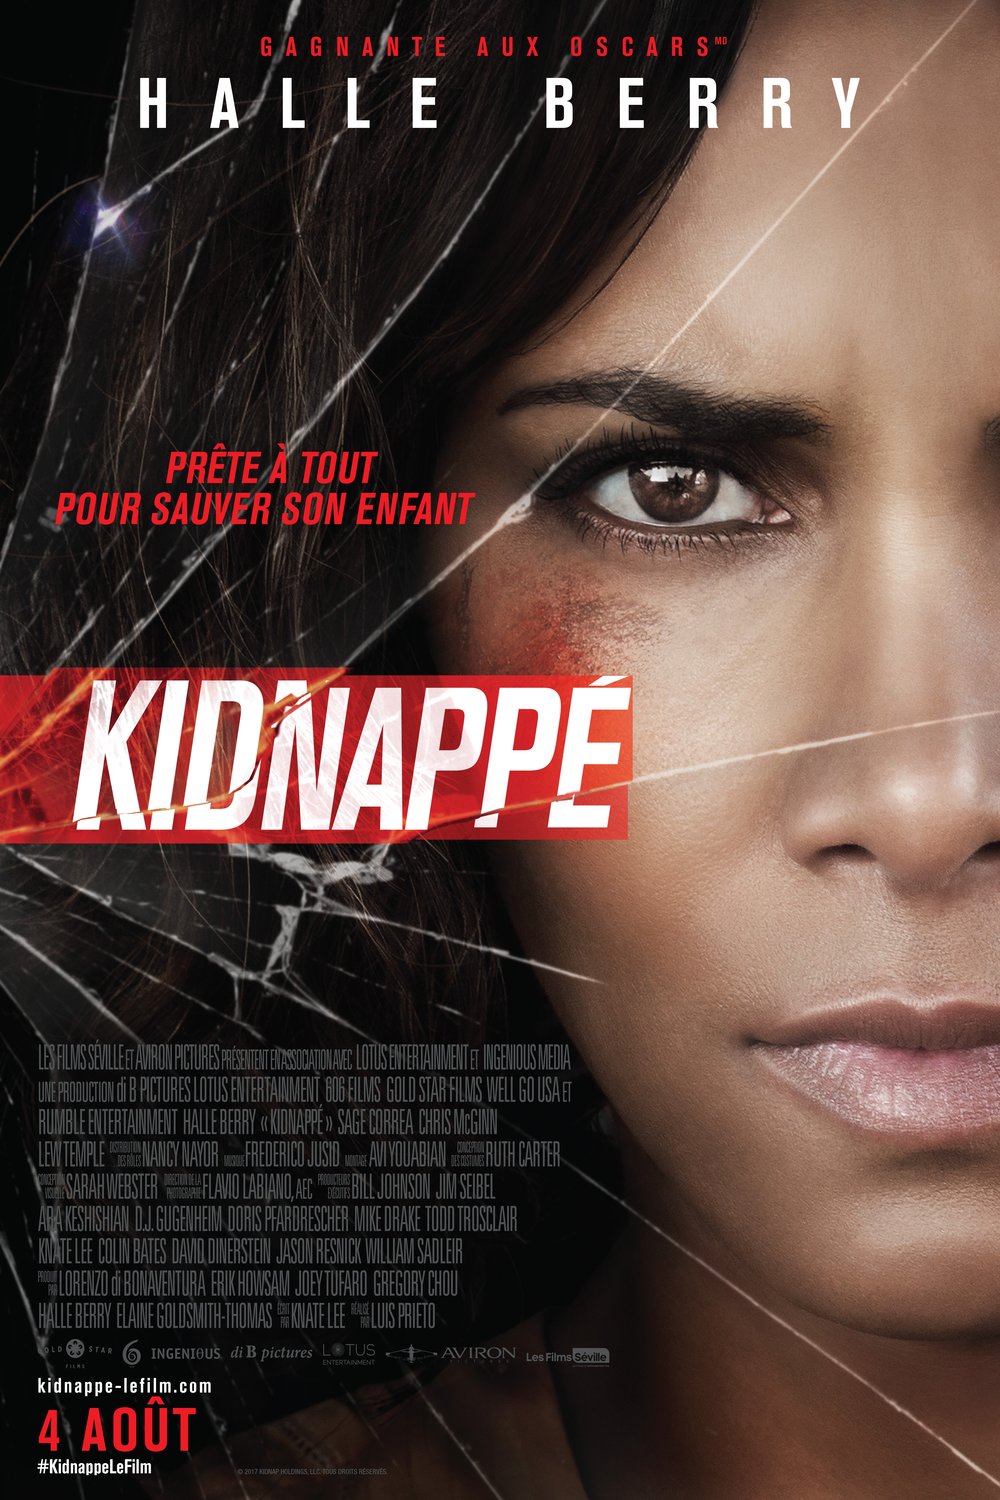 Poster of the movie Kidnappé v.f.